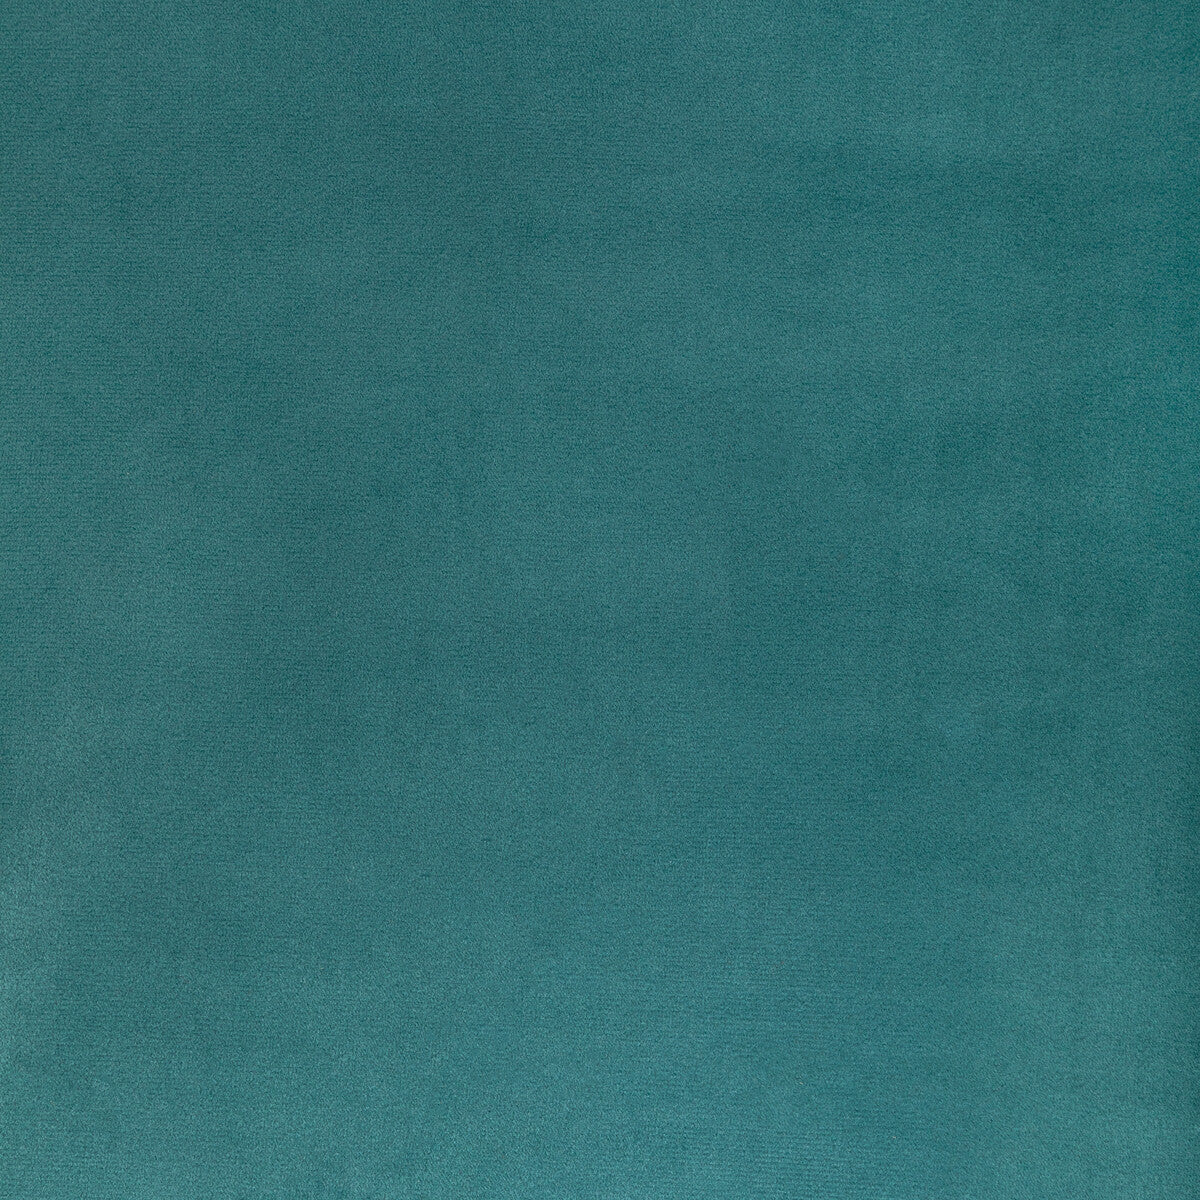 Rocco Velvet fabric in lagoon color - pattern KW-10065.3685MG15.0 - by Kravet Contract